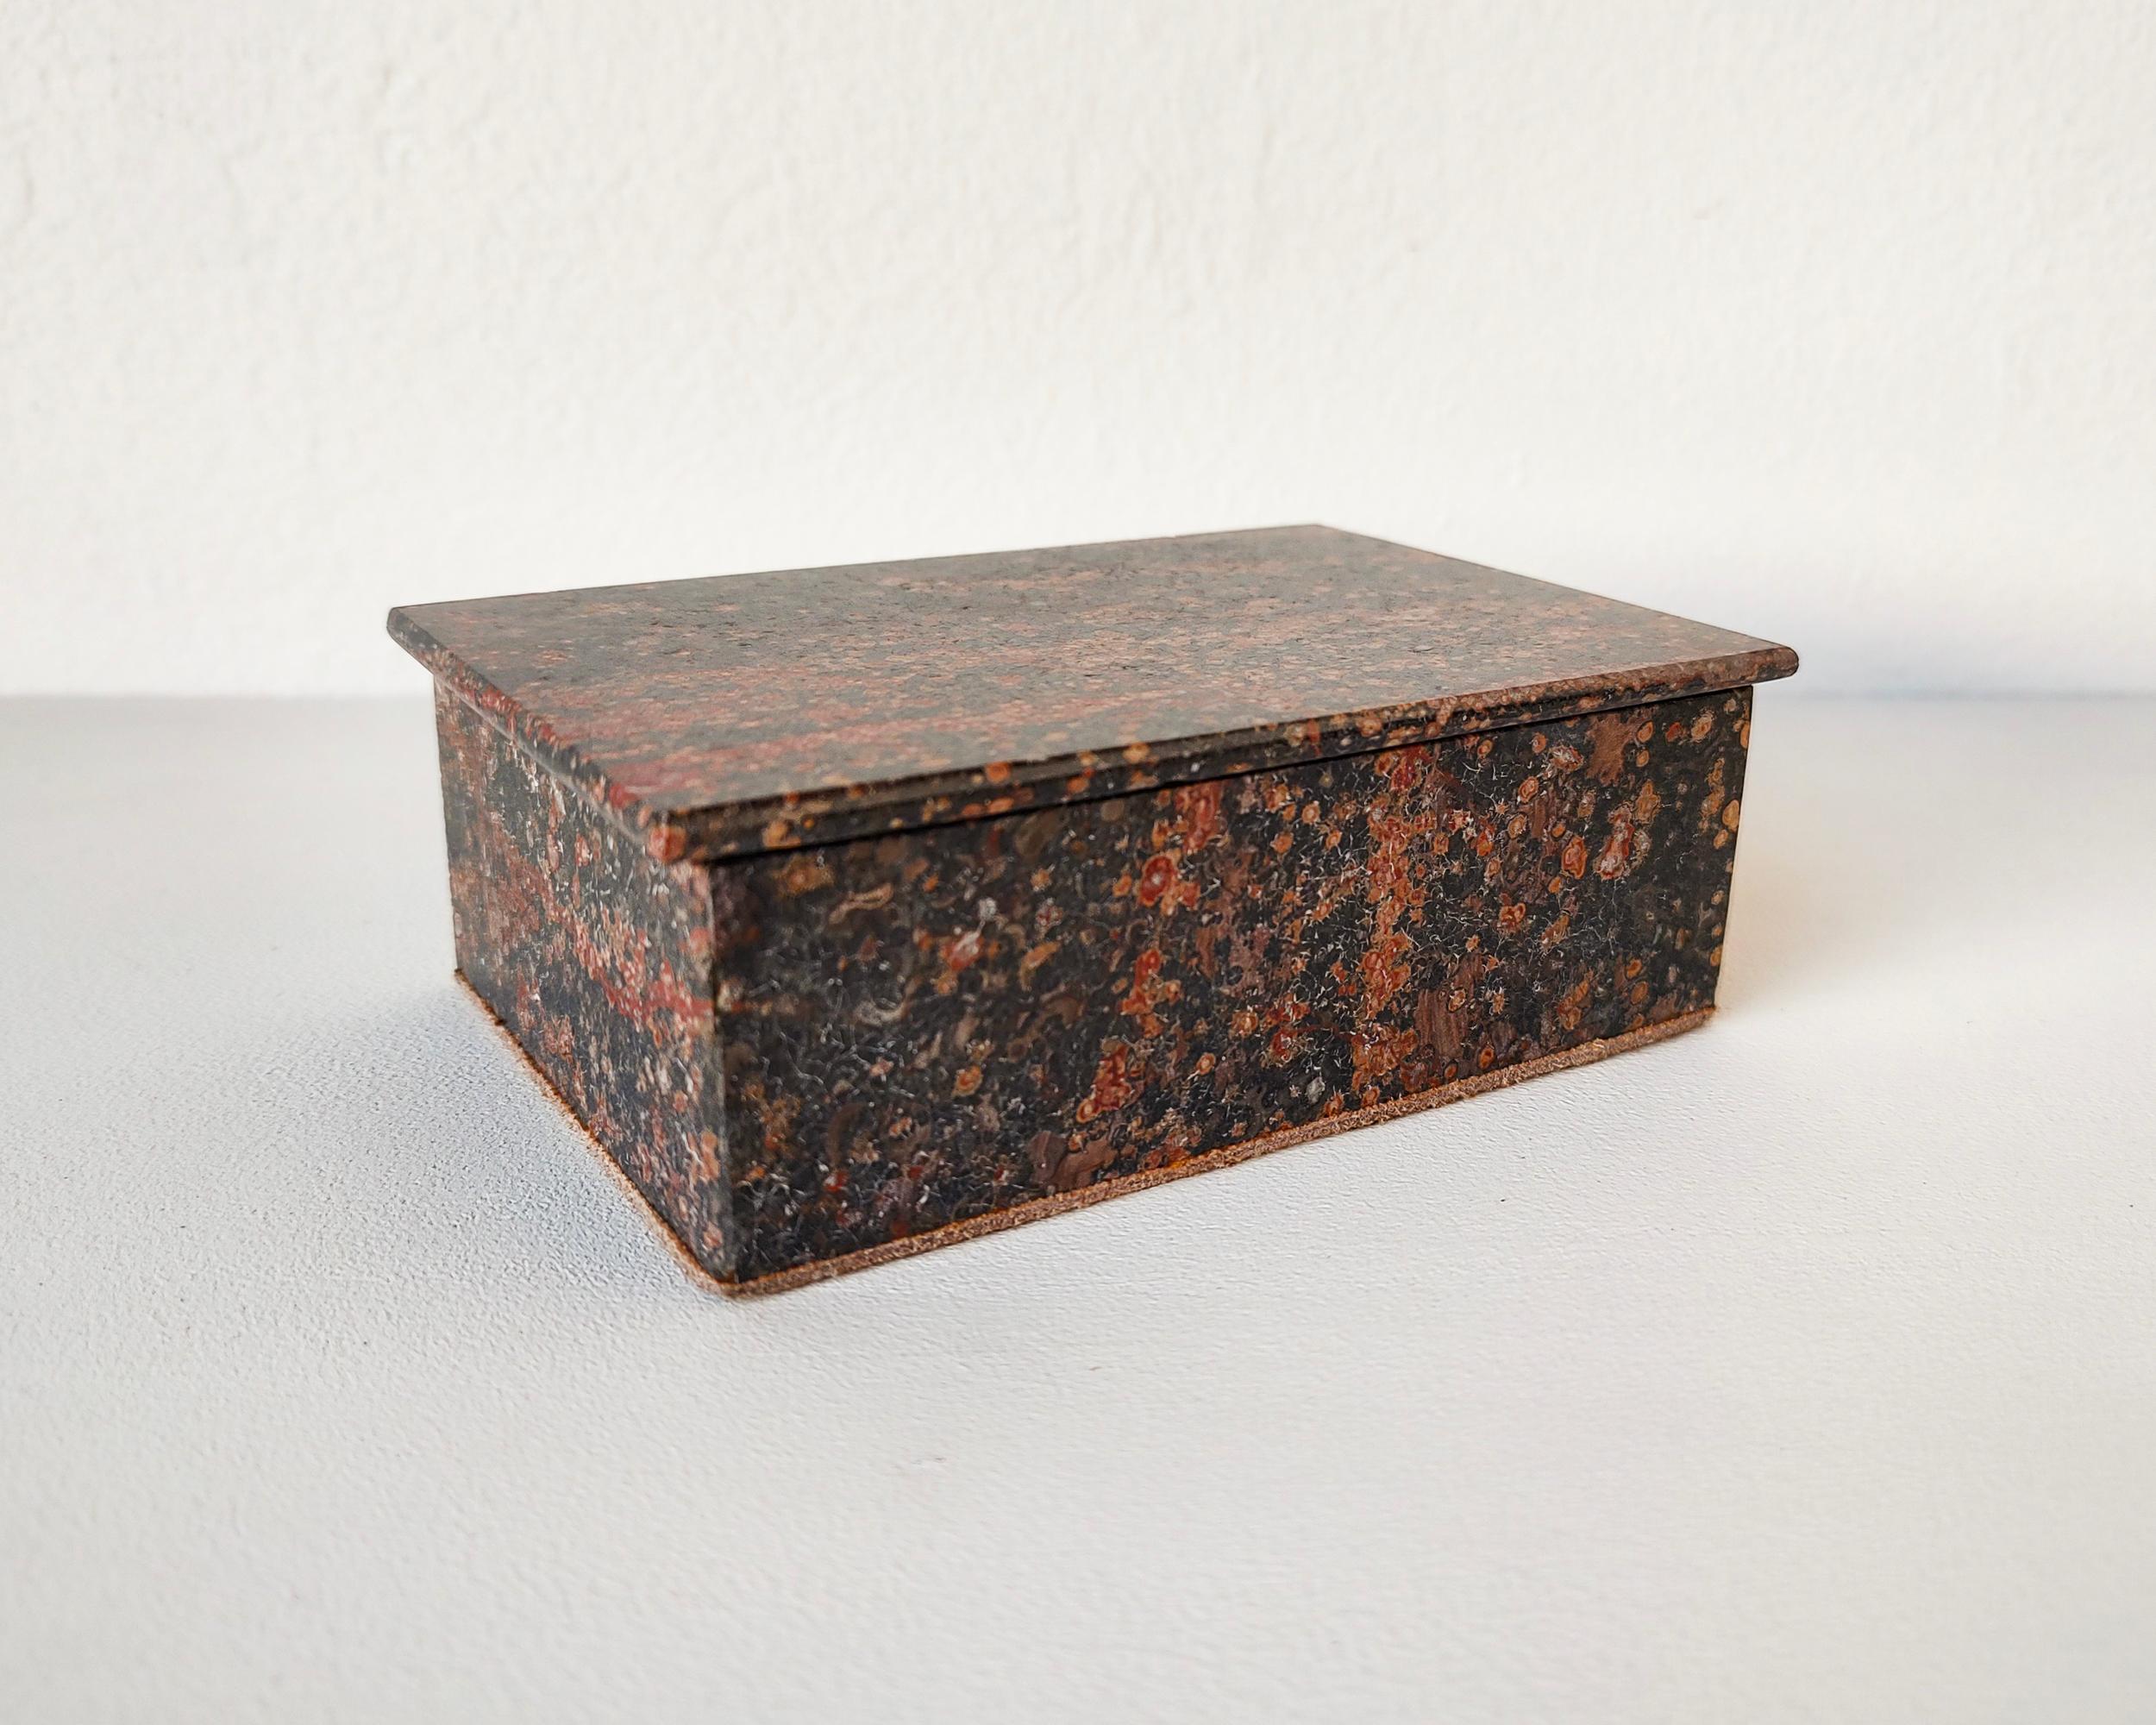 Beautiful lidded stone box made from polished slabs of leopard spot jasper stone. Trimmed with tan suede inside and on the bottom. Triangle pieces on the inside of the lid help to line up the lid for a nice fit. Lid rests on top and does not have